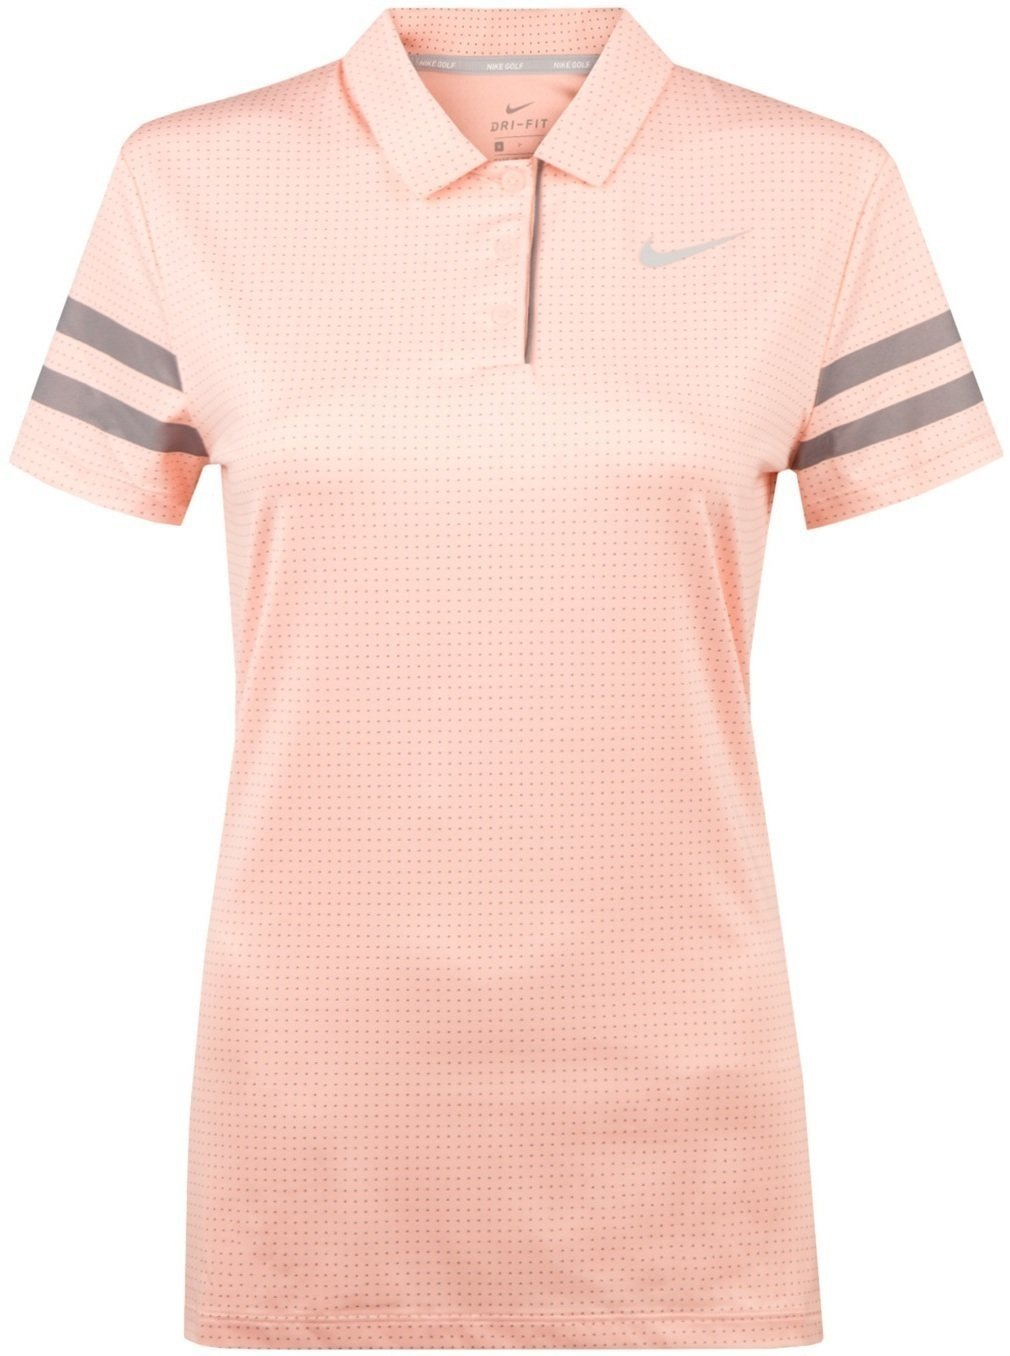 Polo majica Nike Dri-Fit Printed Womens Polo Storm Pink/Anthracite/White S